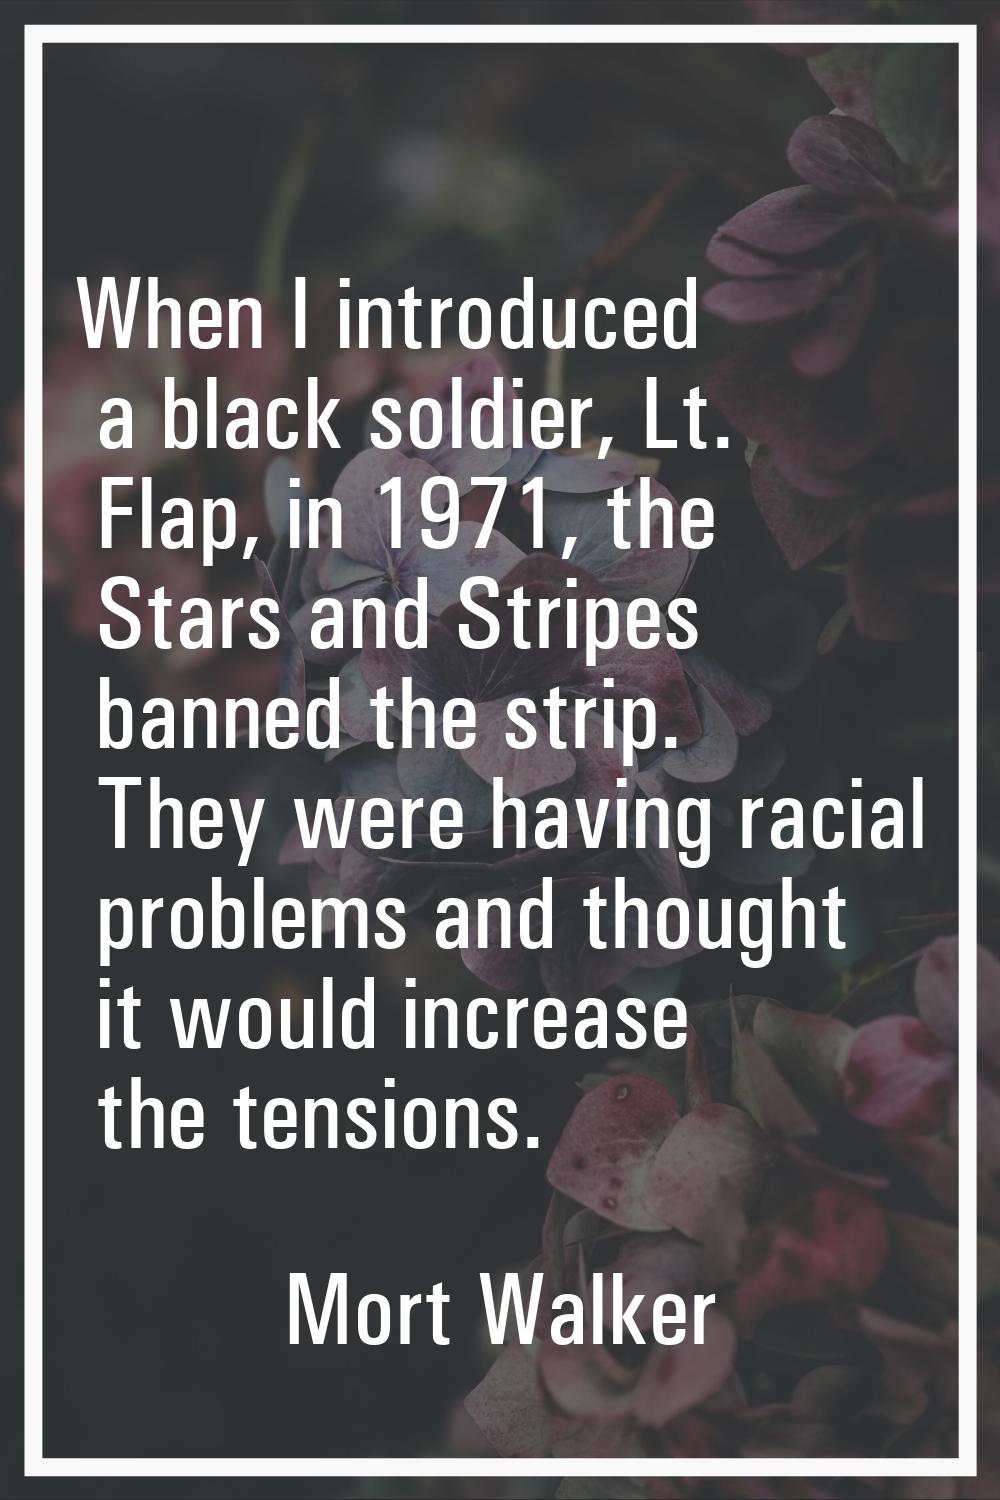 When I introduced a black soldier, Lt. Flap, in 1971, the Stars and Stripes banned the strip. They 